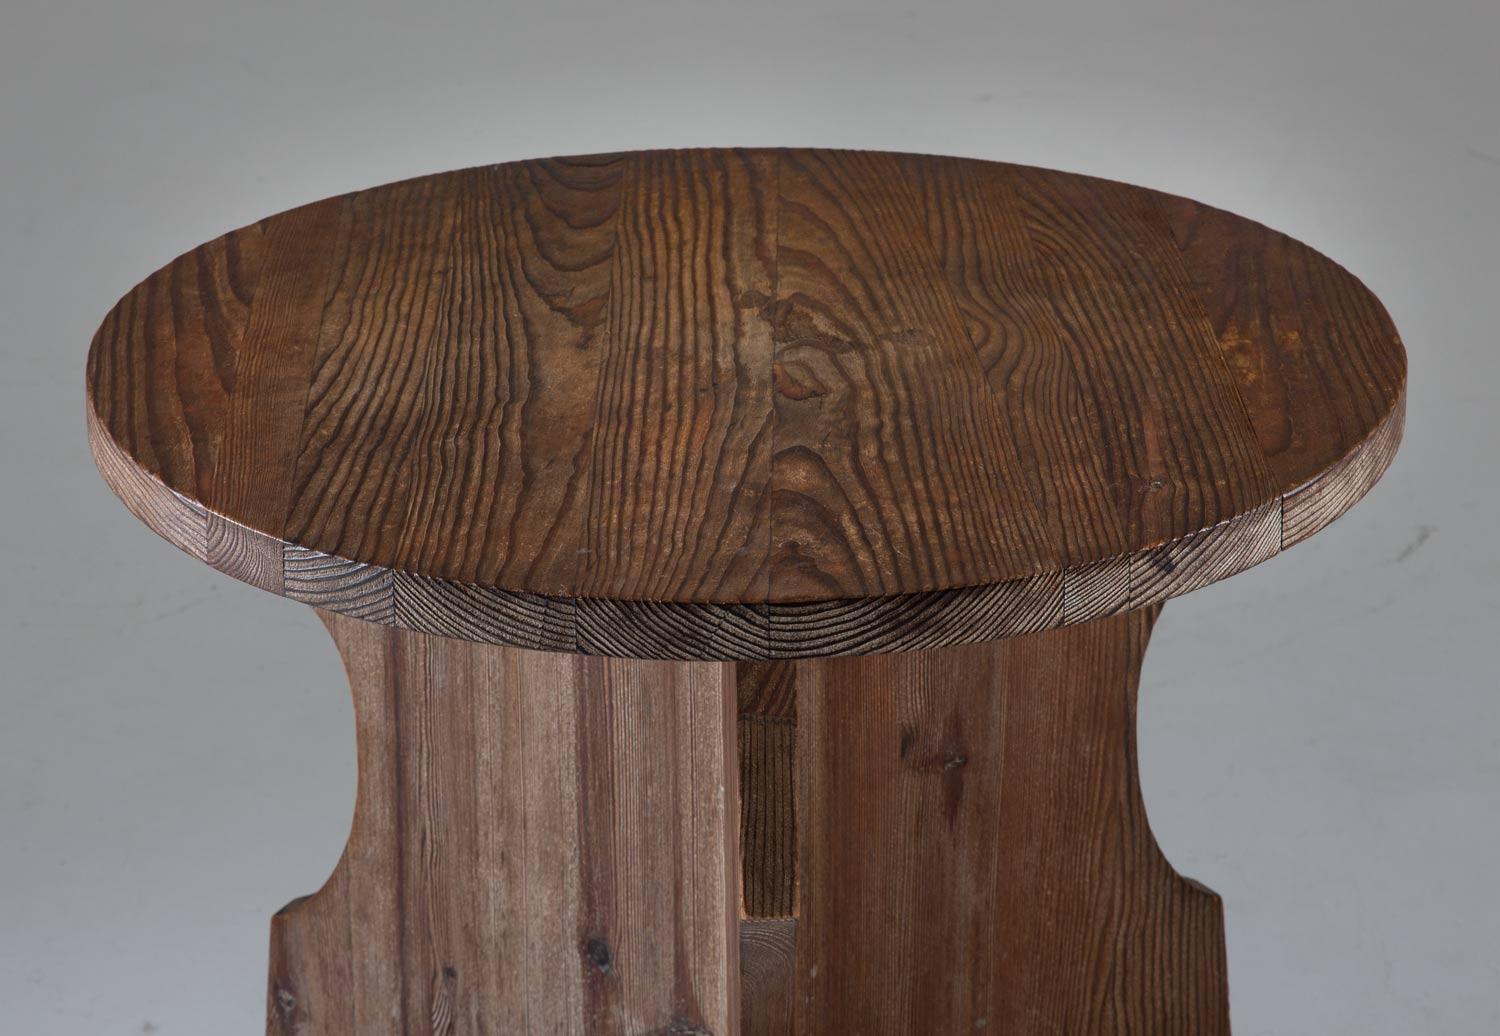 Beautiful and rare Swedish acid-stained side table, according to its original owners bought at Nordiska Kompaniet in the 1930s.
This table is a great example of the pine furniture made for cabins that was produced during the early modernist era in